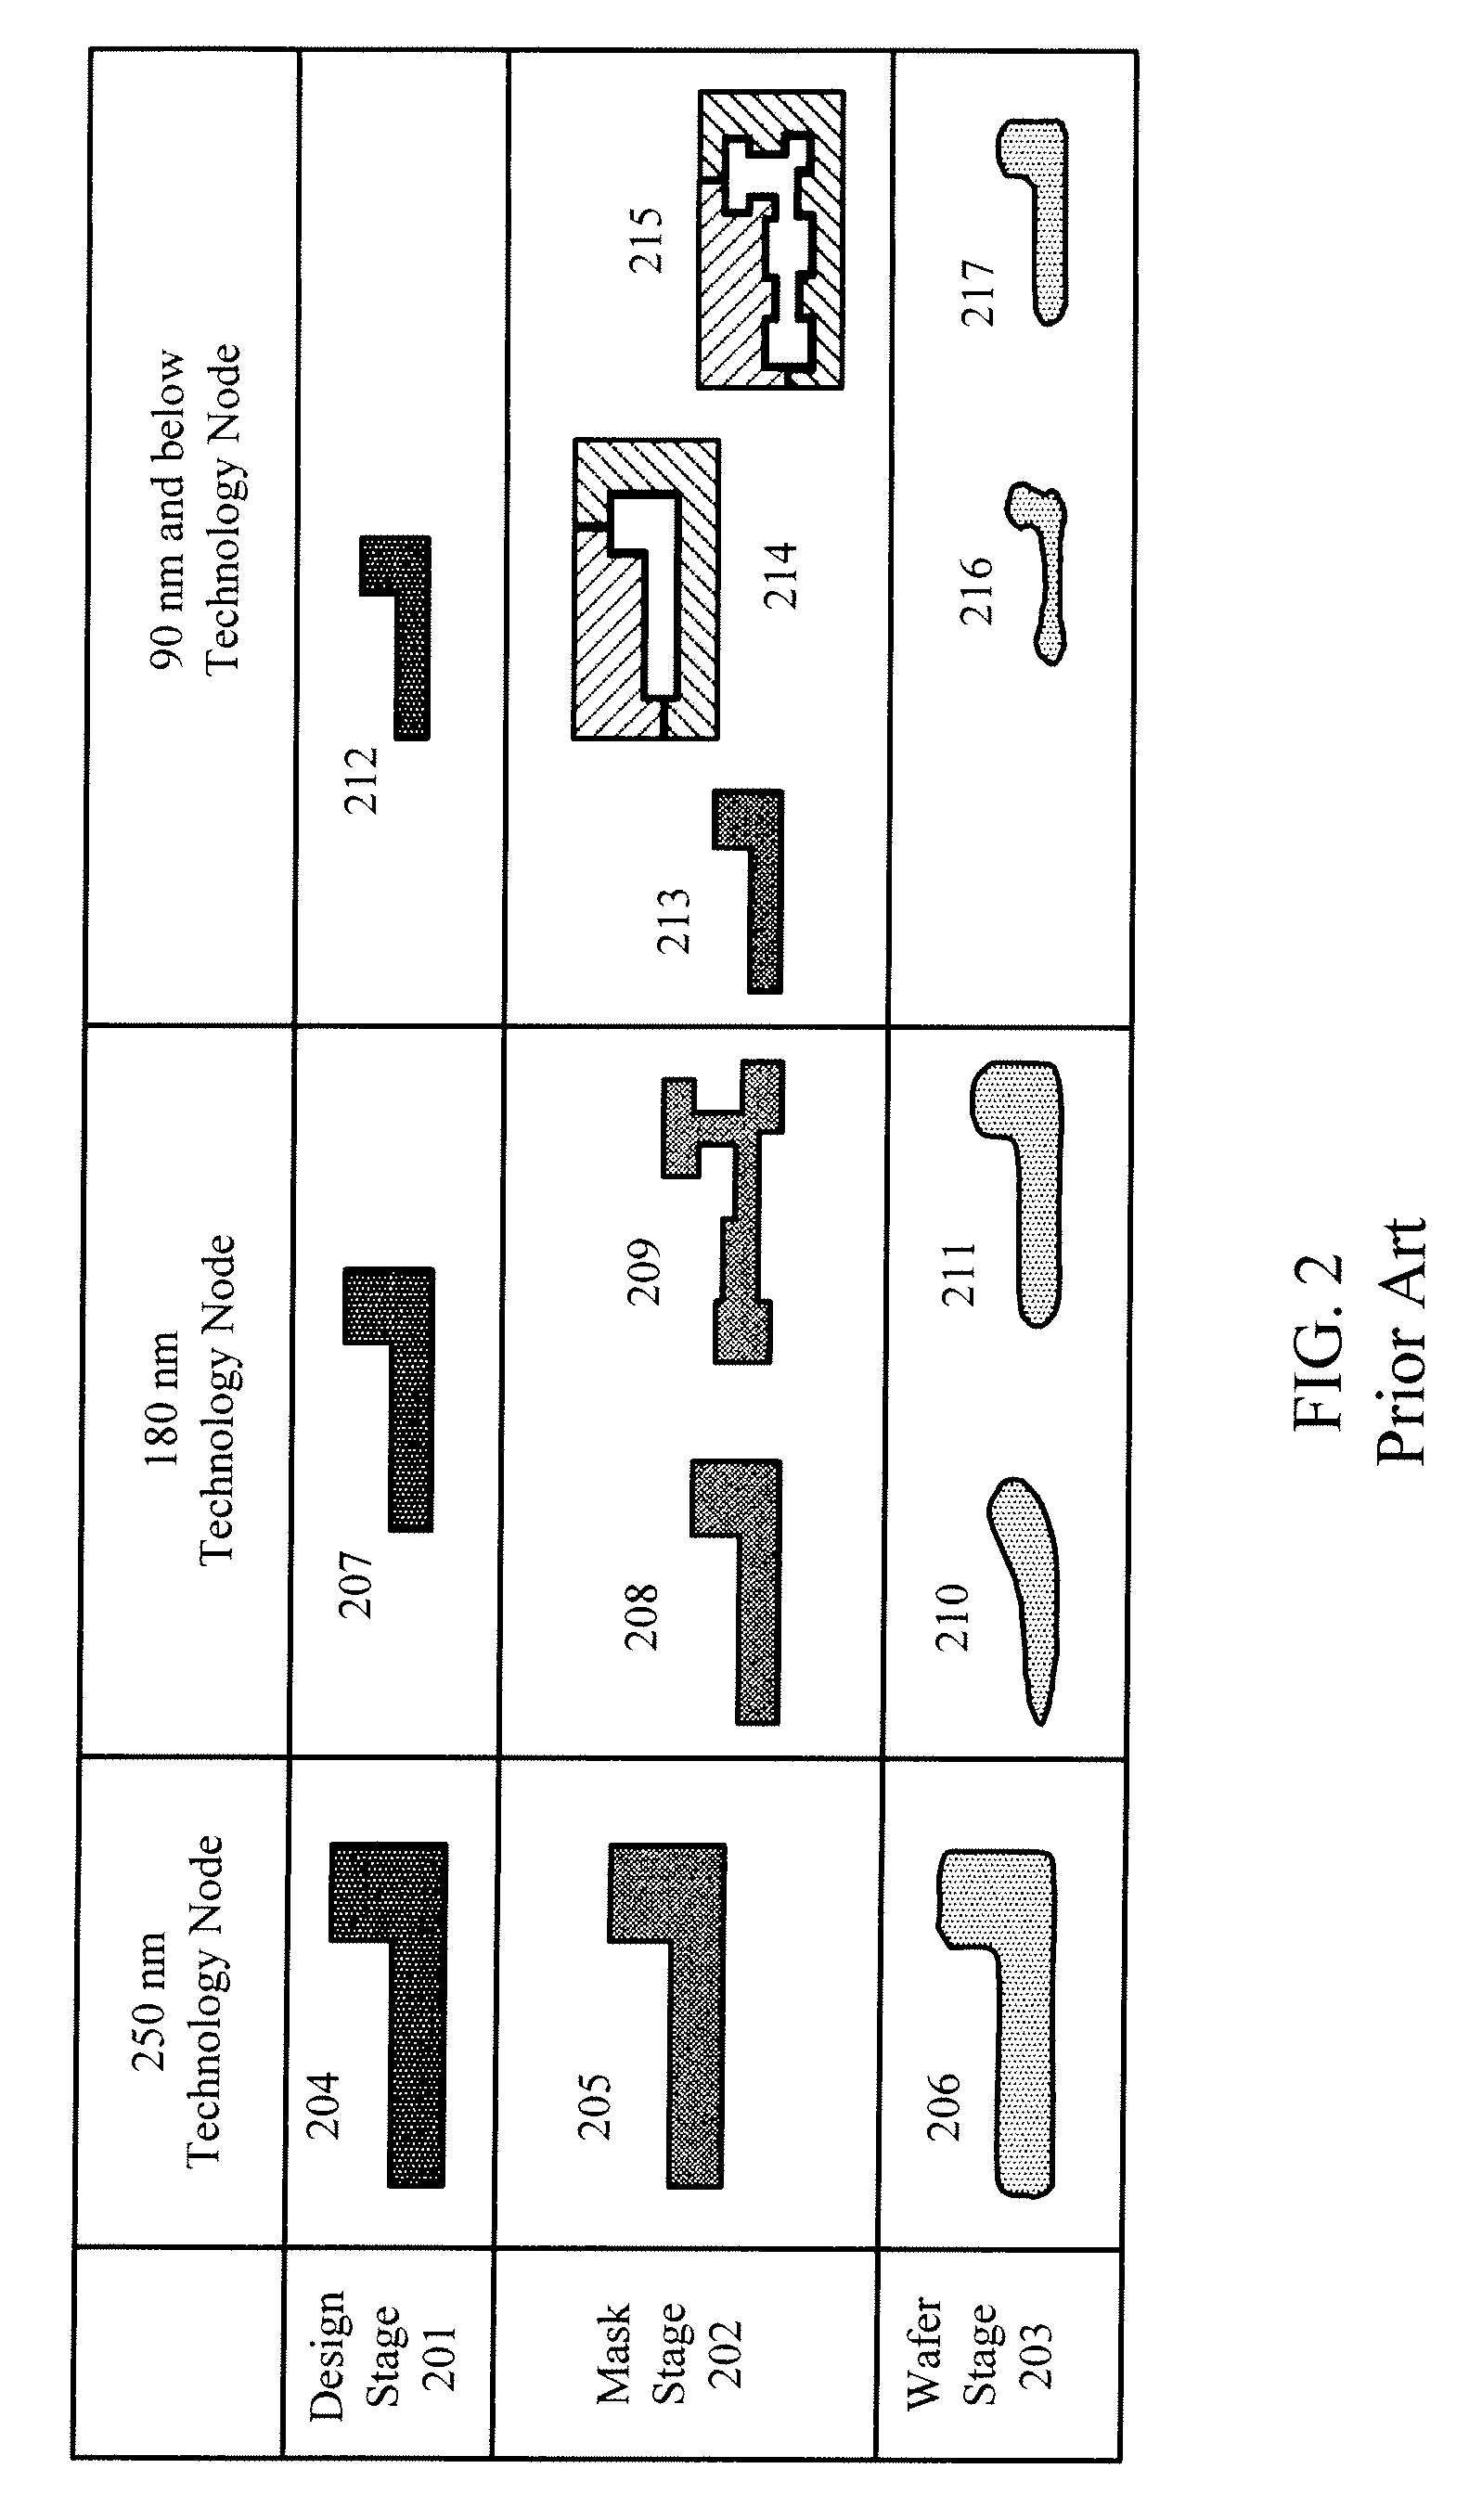 Patterning A Single Integrated Circuit Layer Using Multiple Masks And Multiple Masking Layers